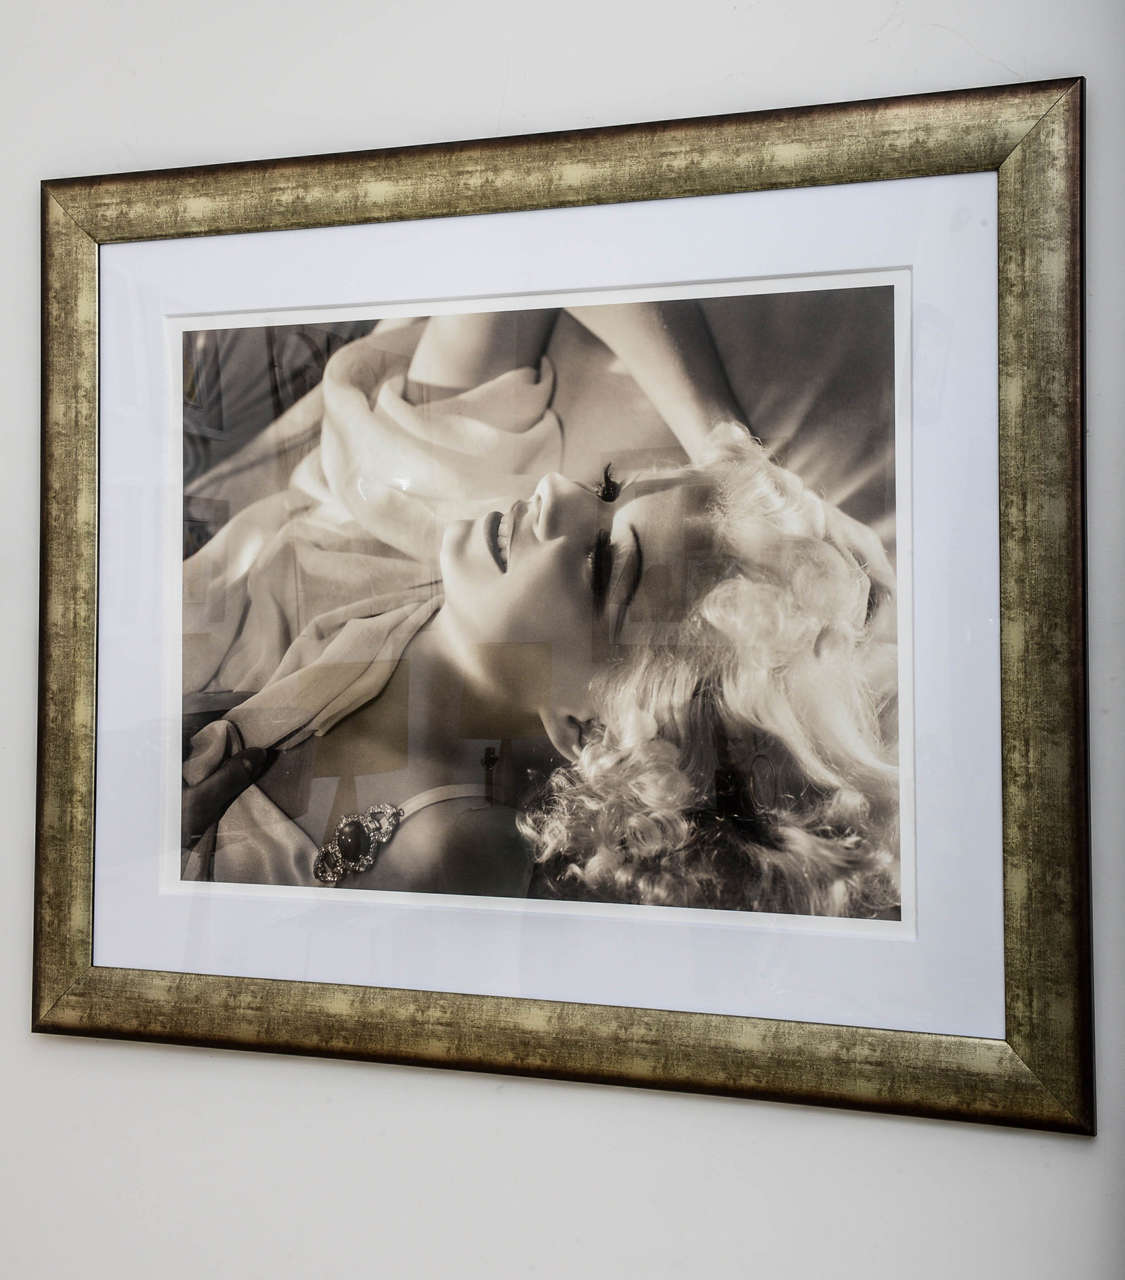 Framed archival pigment print (AP 2/5) of Jean Harlow (1932) by George Hurrell. Produced under the authority of the Hurrell Estate collection, LLC this print is part of a limited edition series of no more than 50 prints and five artist proofs.